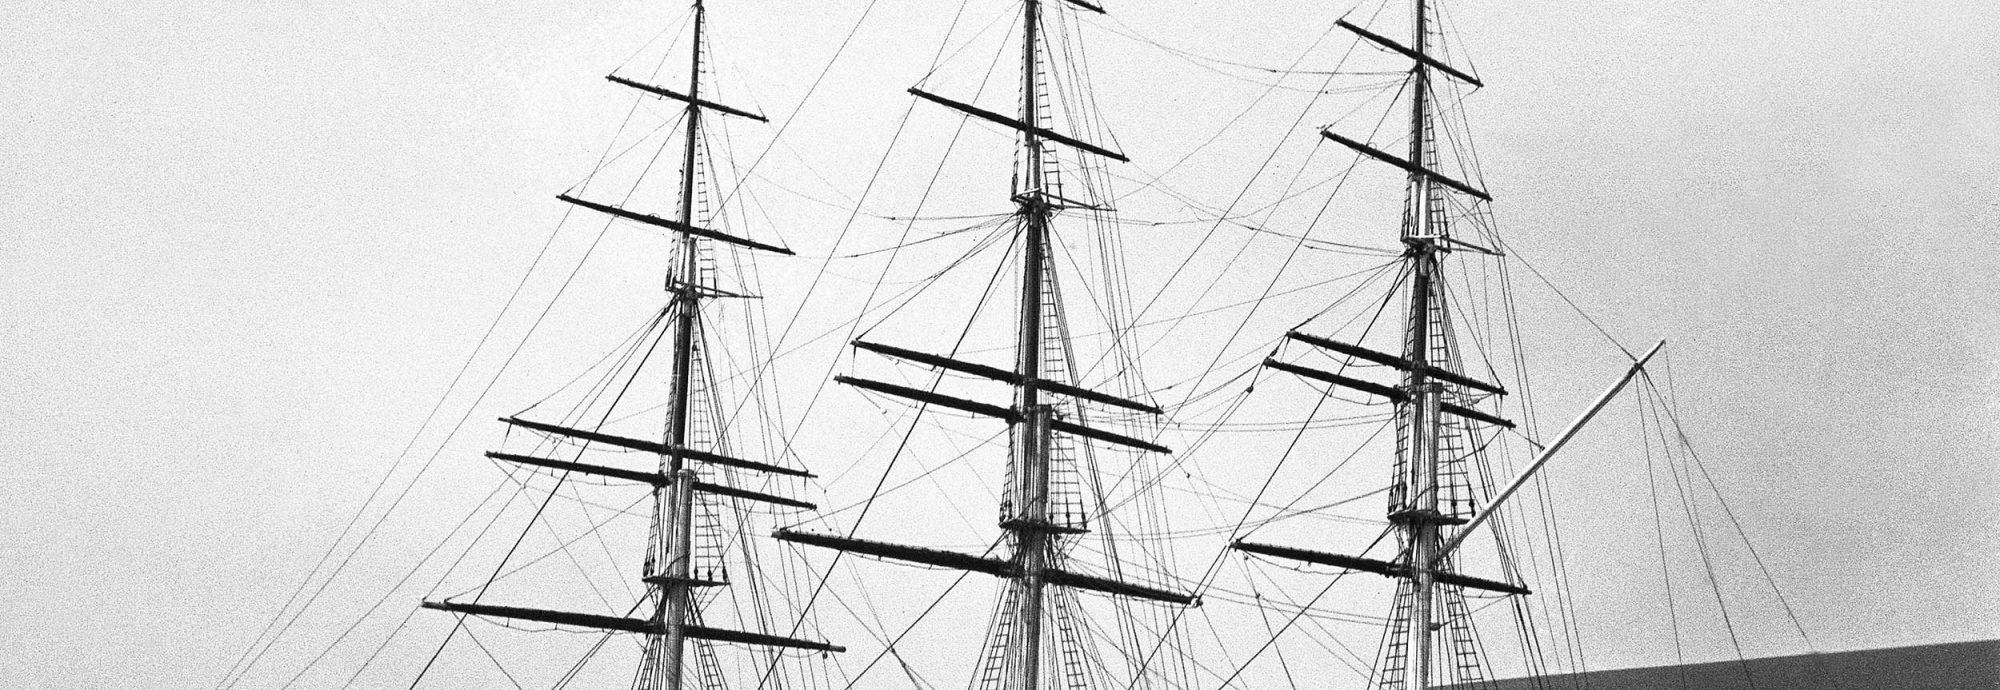 A black and white photo of the Cutty Sark.